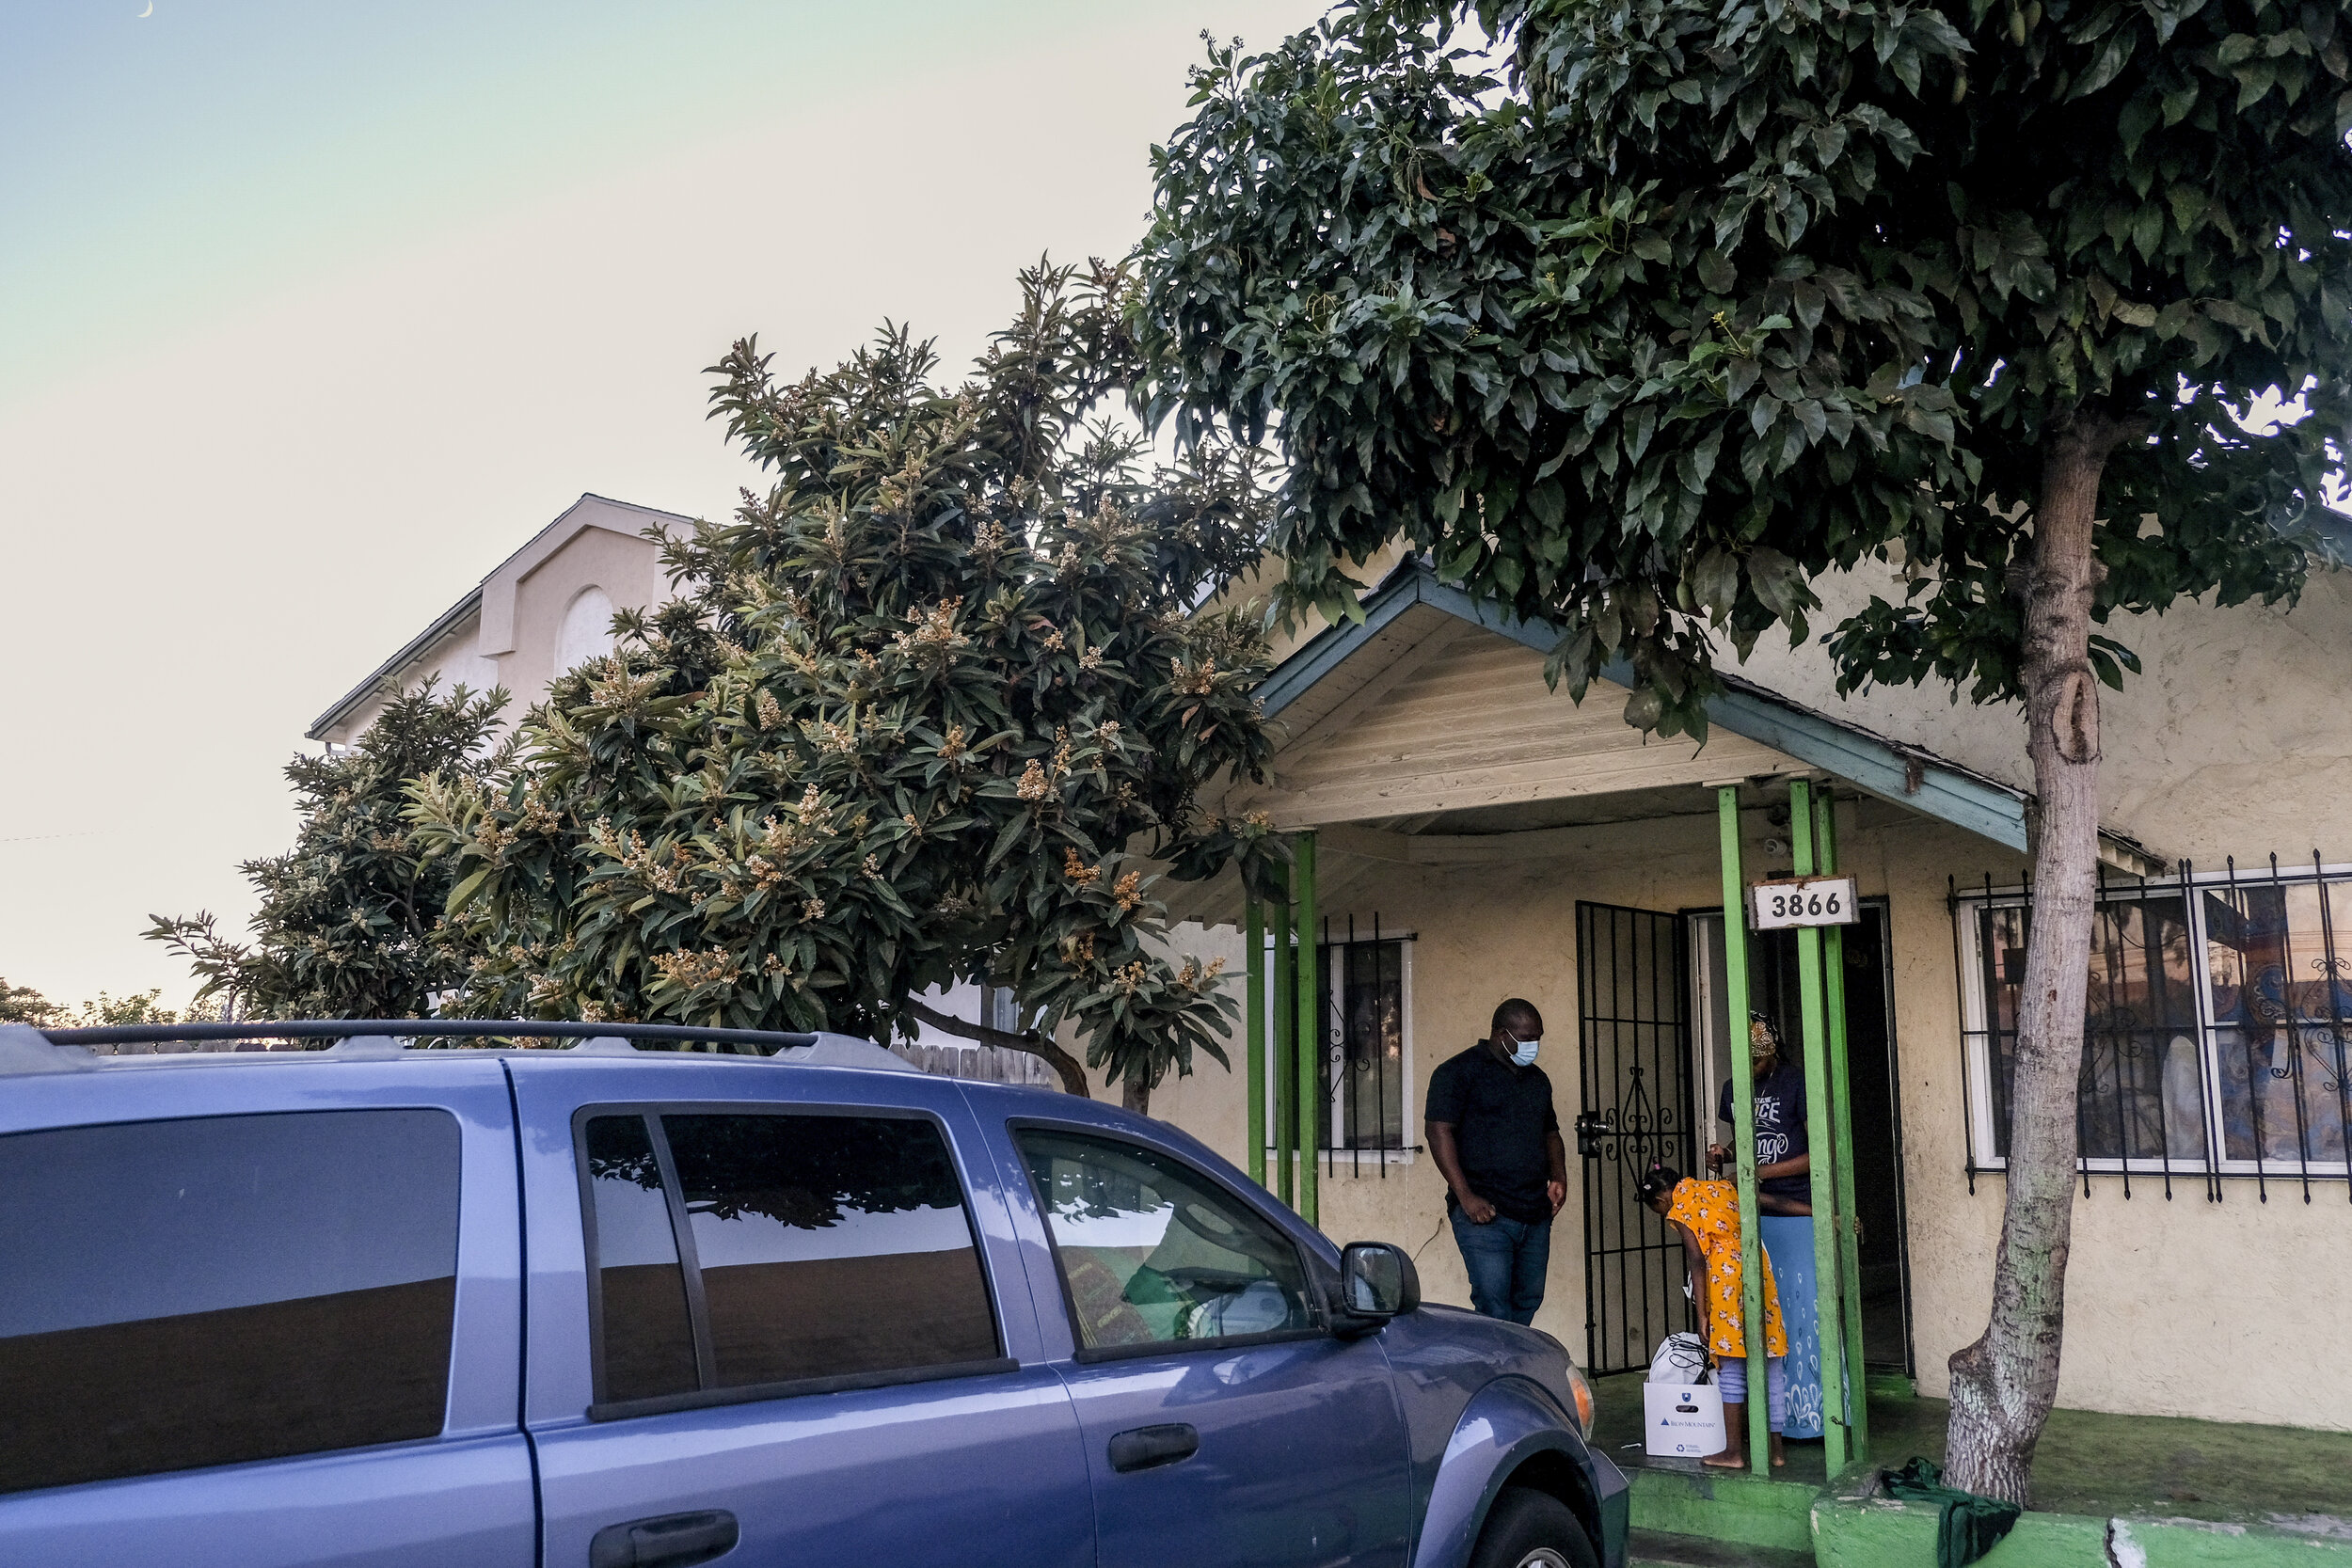  USA, San Diego, CA, December 1, 2020. Daniel Nyamangah, a Community Organizer at Parent Student Resident Organization (PSRO), delivers diapers and school supplies to Musa at dusk. They met when Musa was a high school student and became involved in P